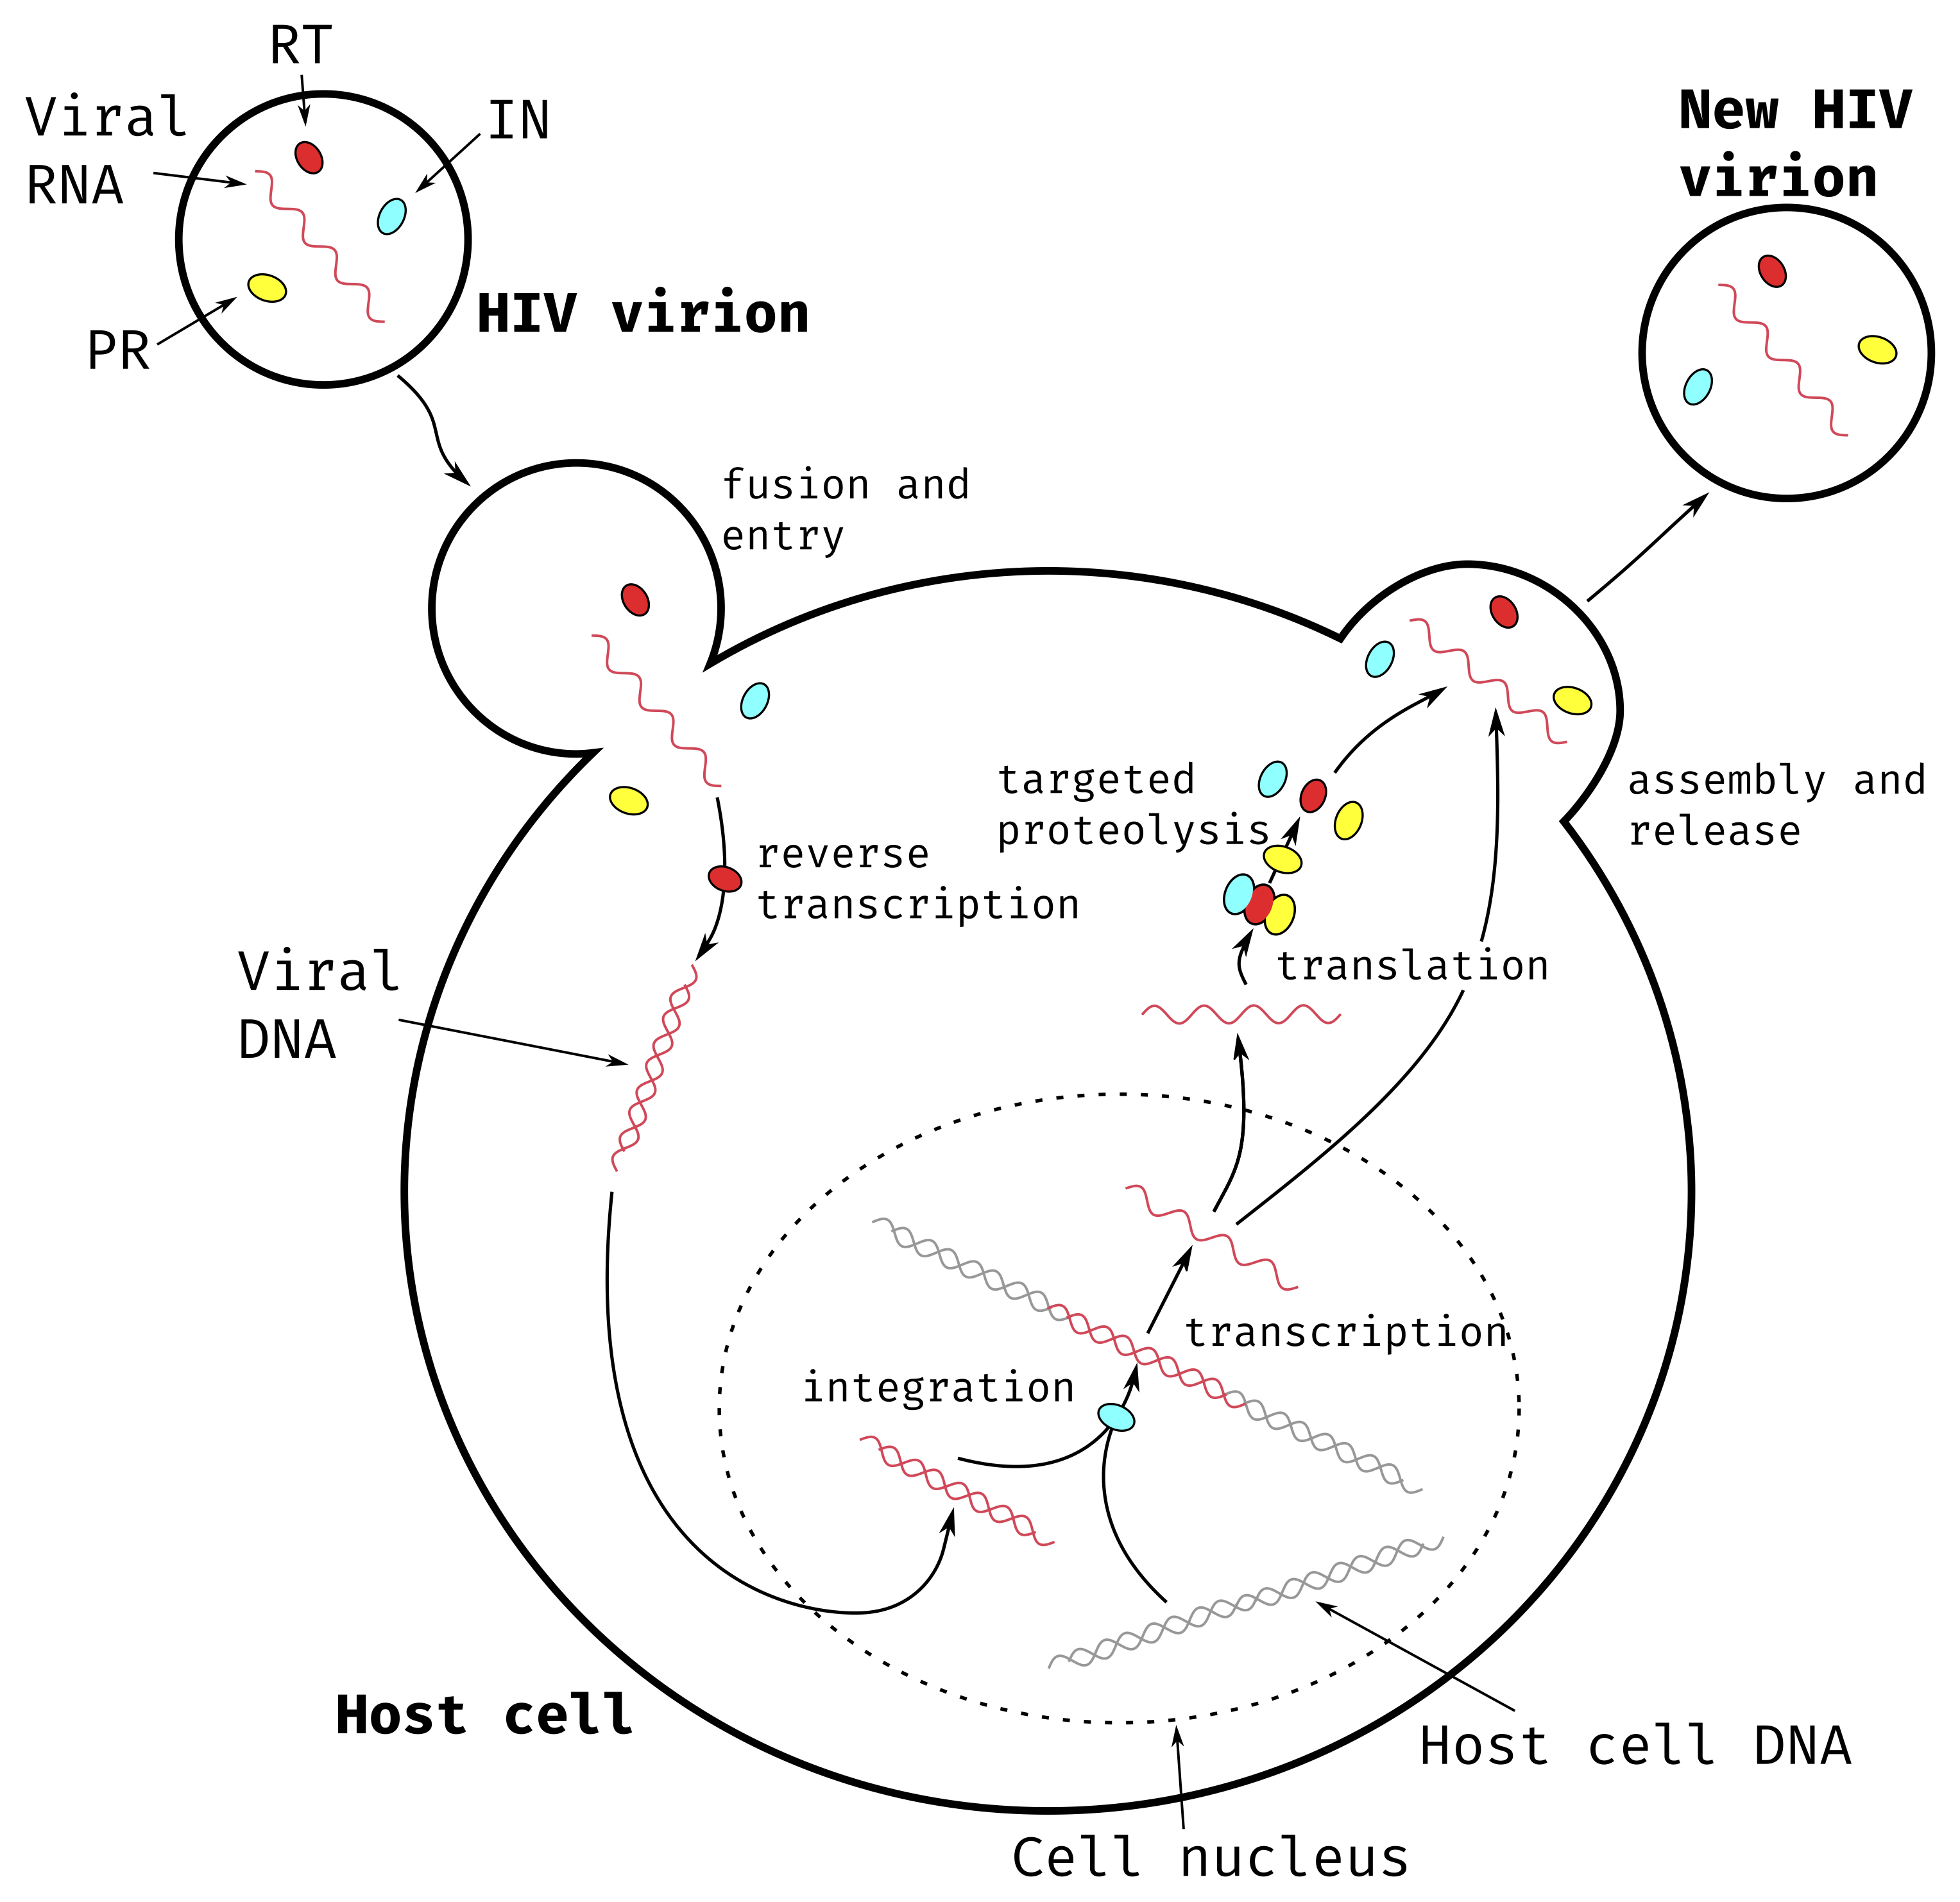 **Main steps of HIV-1 replication cycle.**  
The HIV virion contains viral RNA and three essential proteins: Reverse Transcriptase (RT) represented in red, Integrase (IN) represented in cyan and Protease (PR) represented in yellow.
